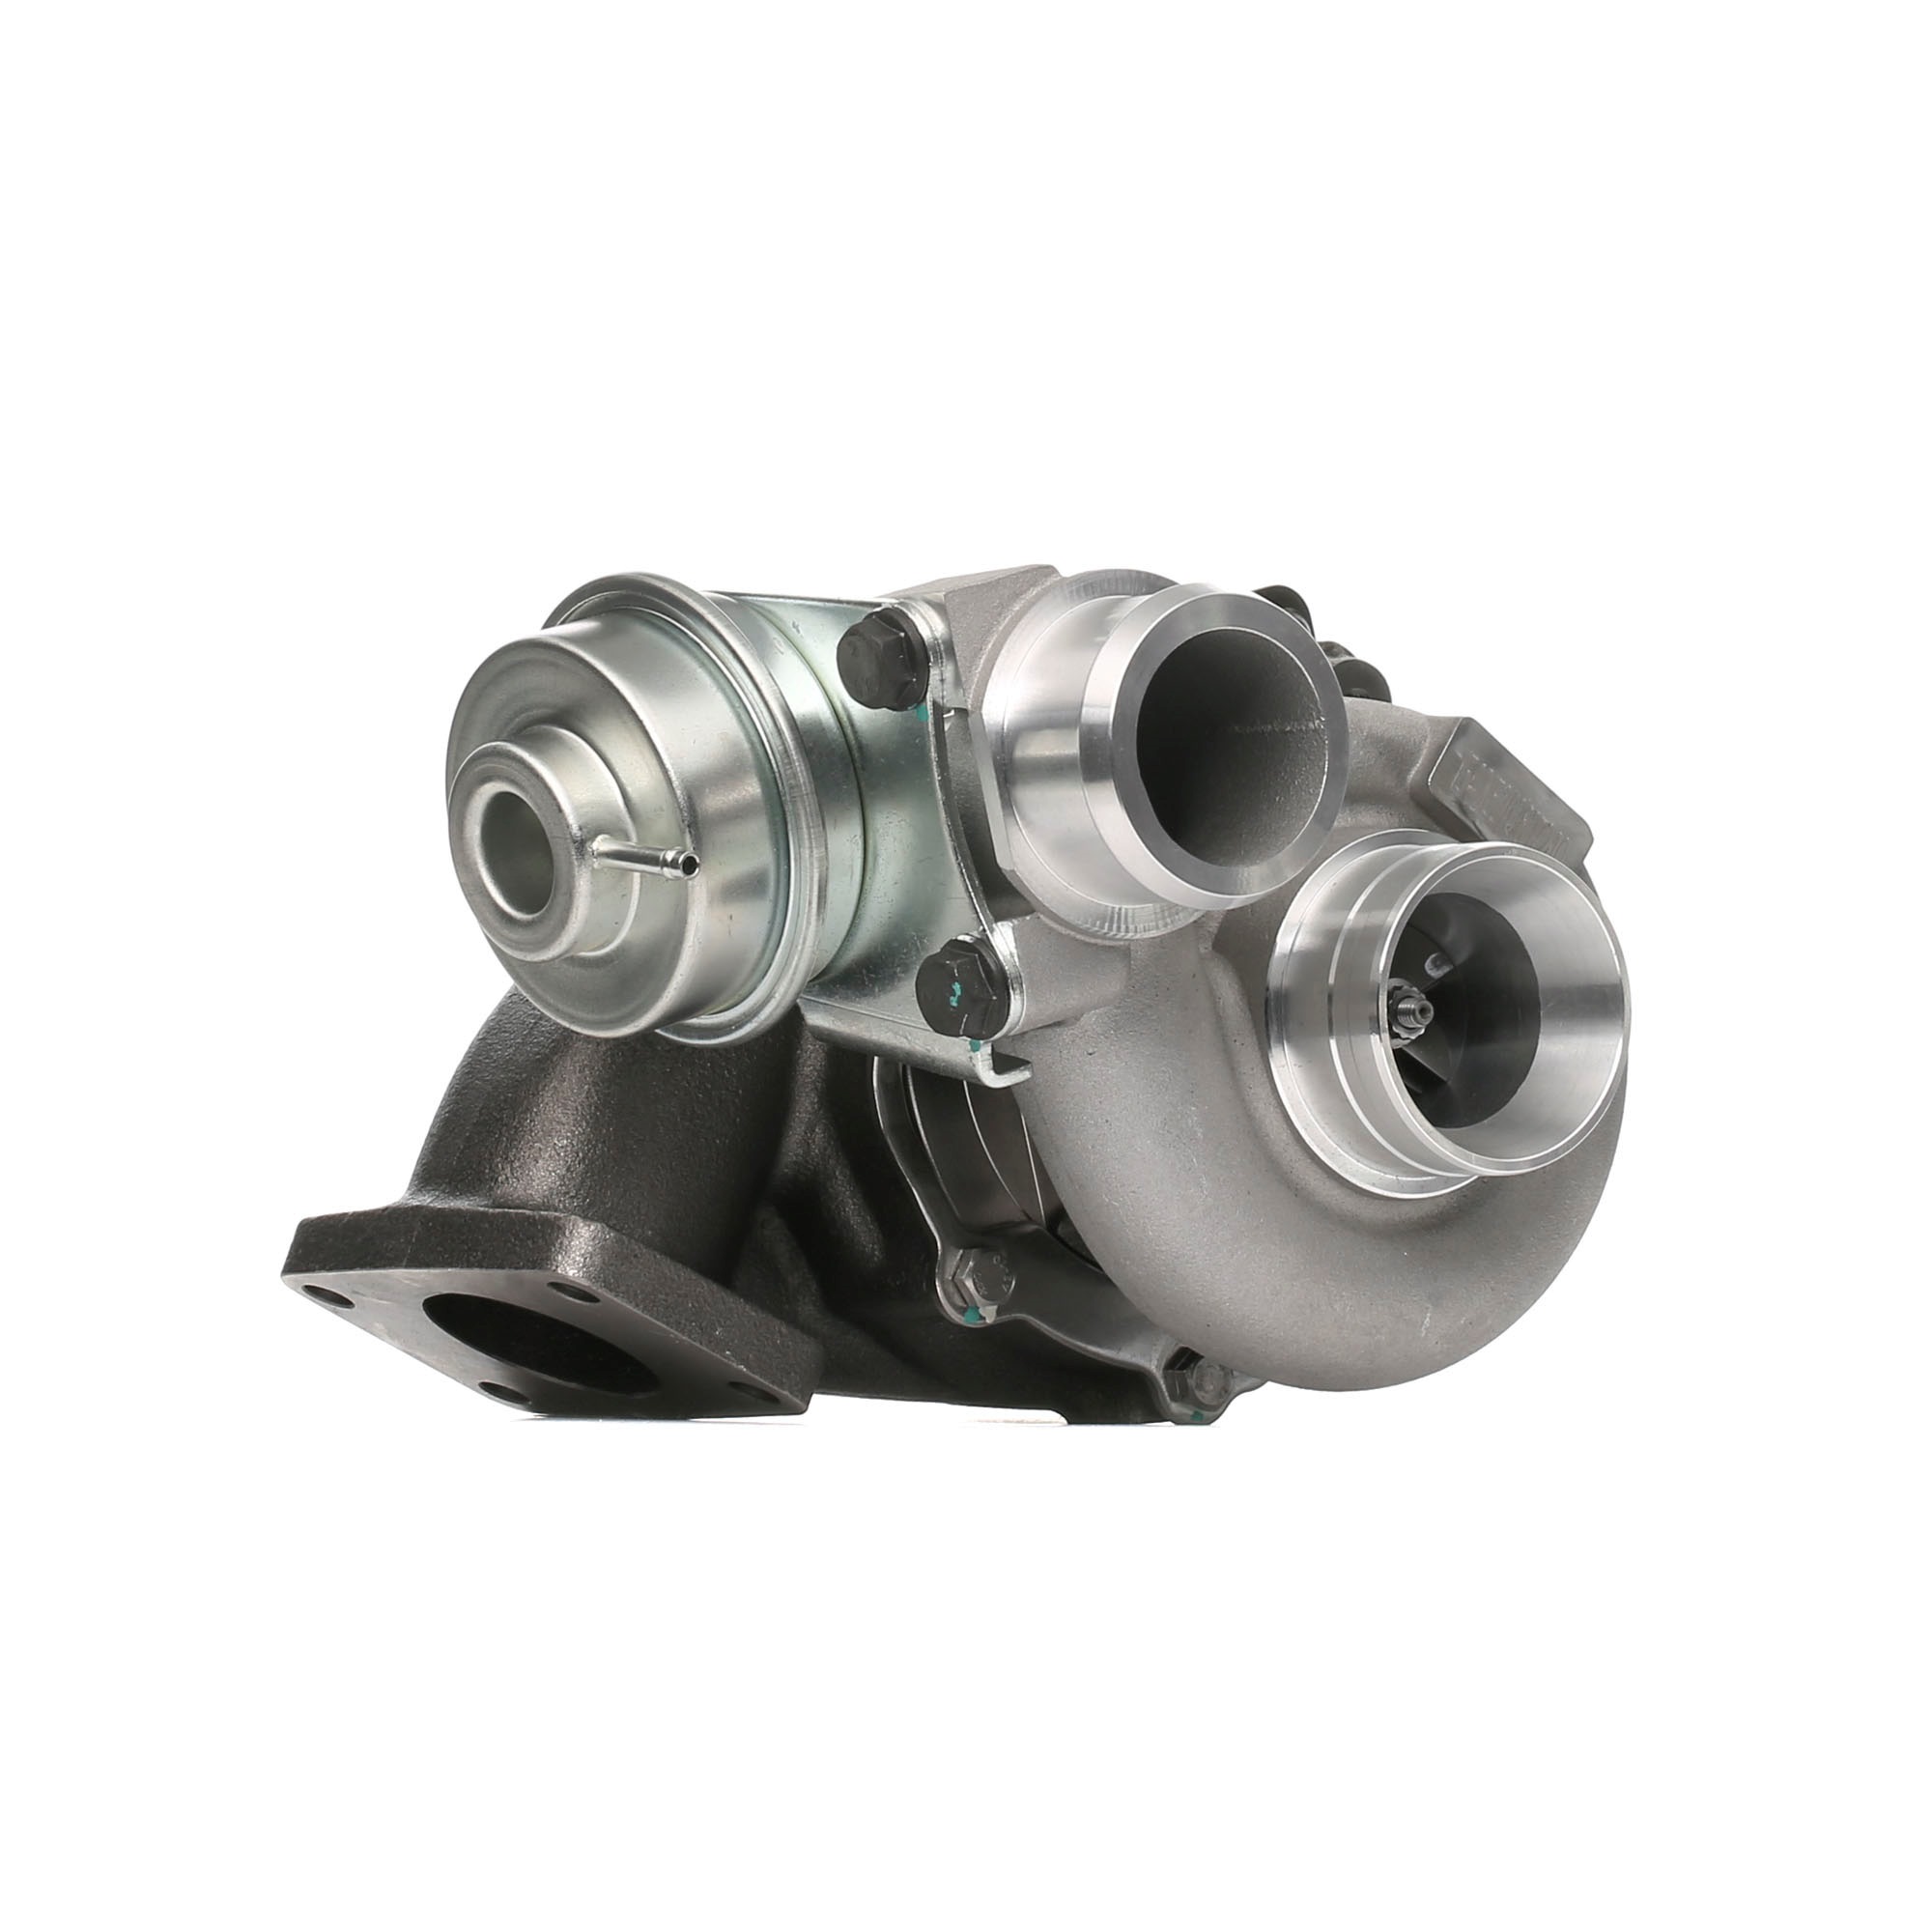 RIDEX 2234C0125 Turbocharger Exhaust Turbocharger, Euro 4 (D4), without attachment material